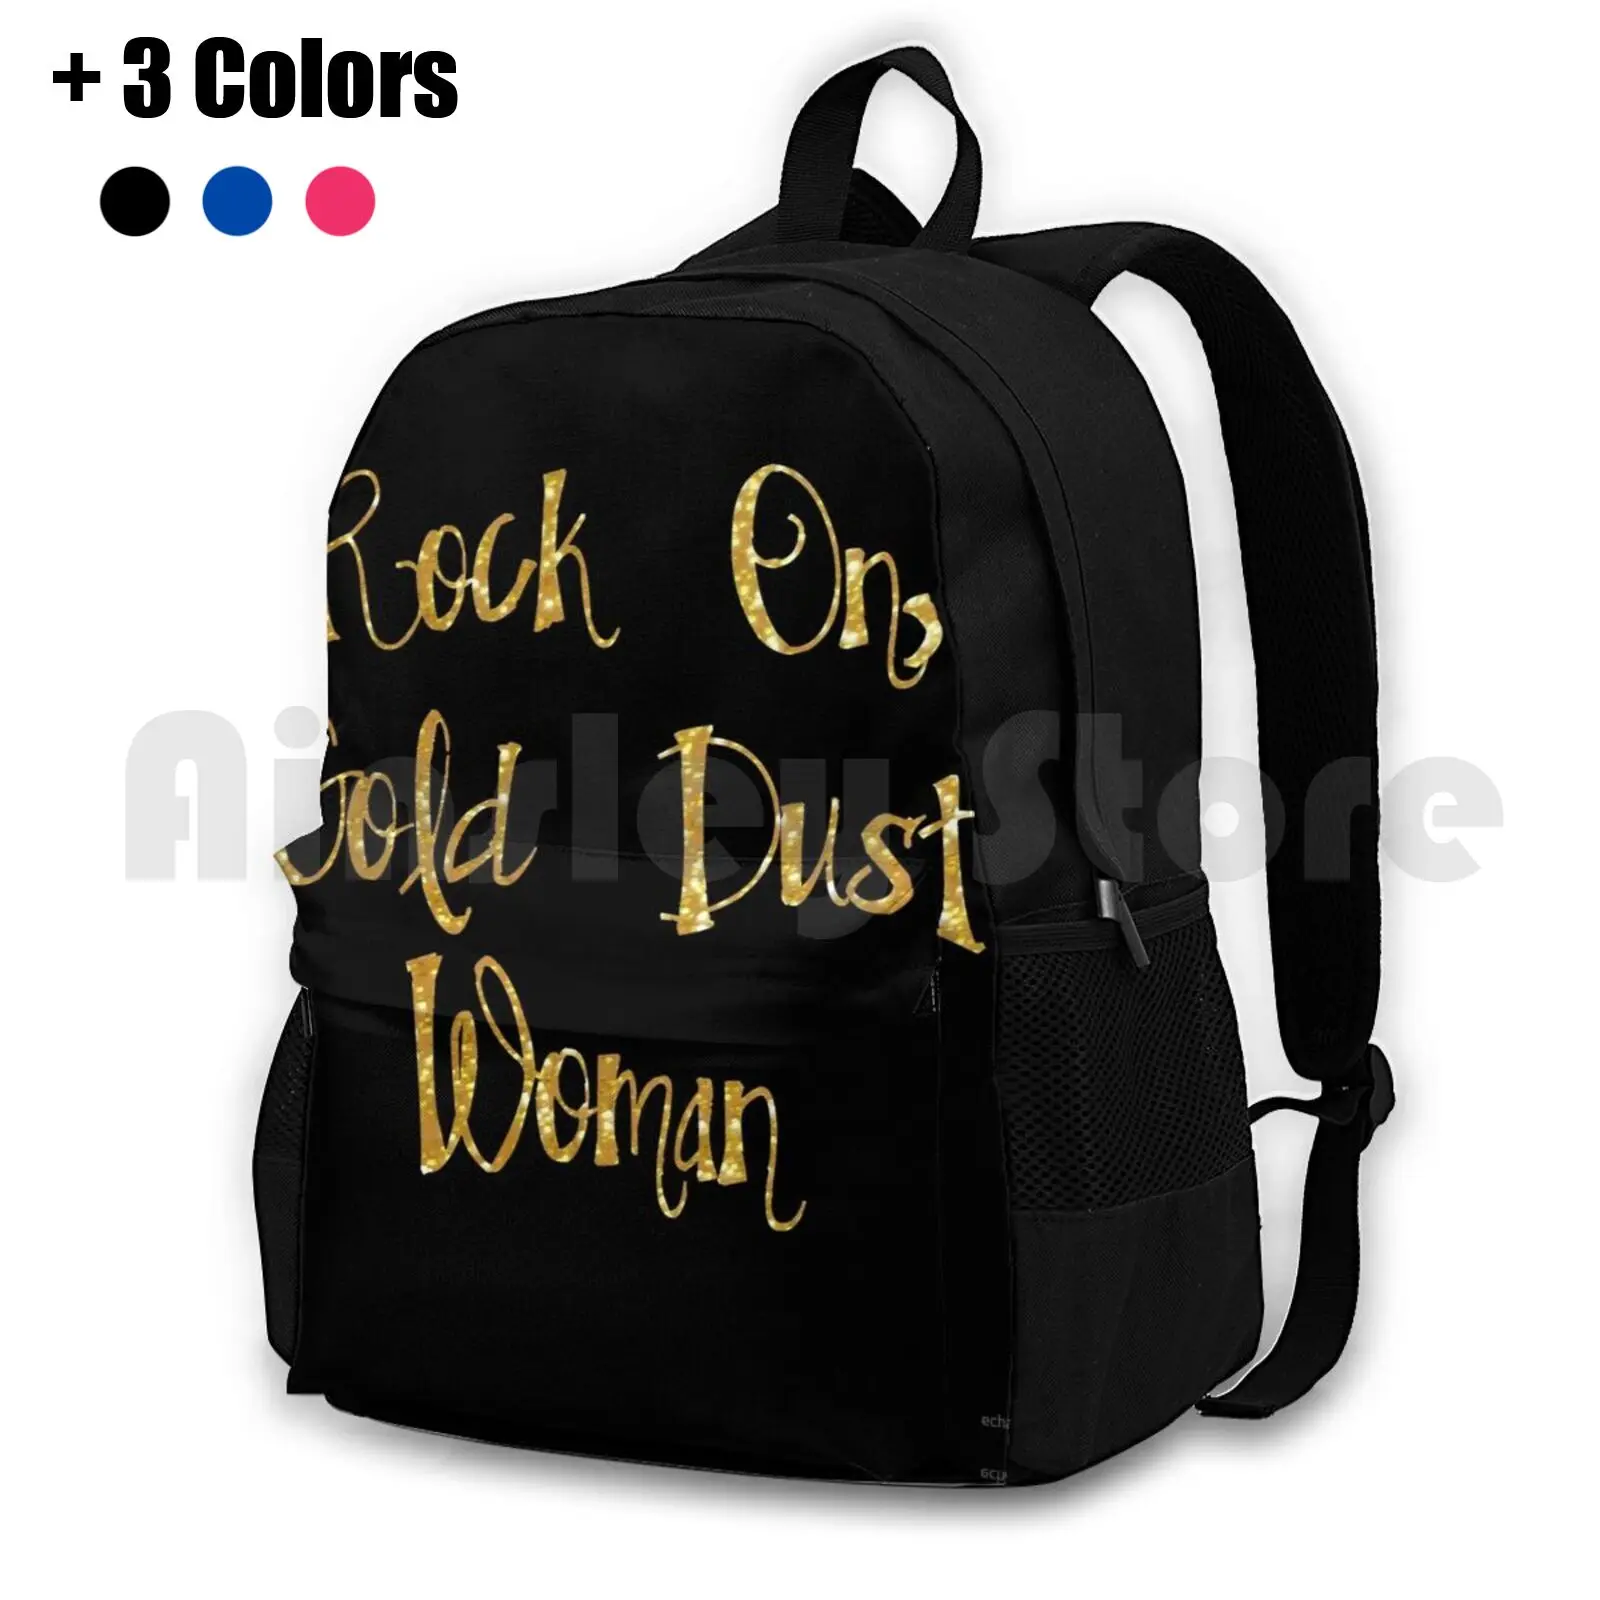 

Gold Dust Woman Outdoor Hiking Backpack Waterproof Camping Travel Stevie Nicks Music Lyric Song Quote Typography